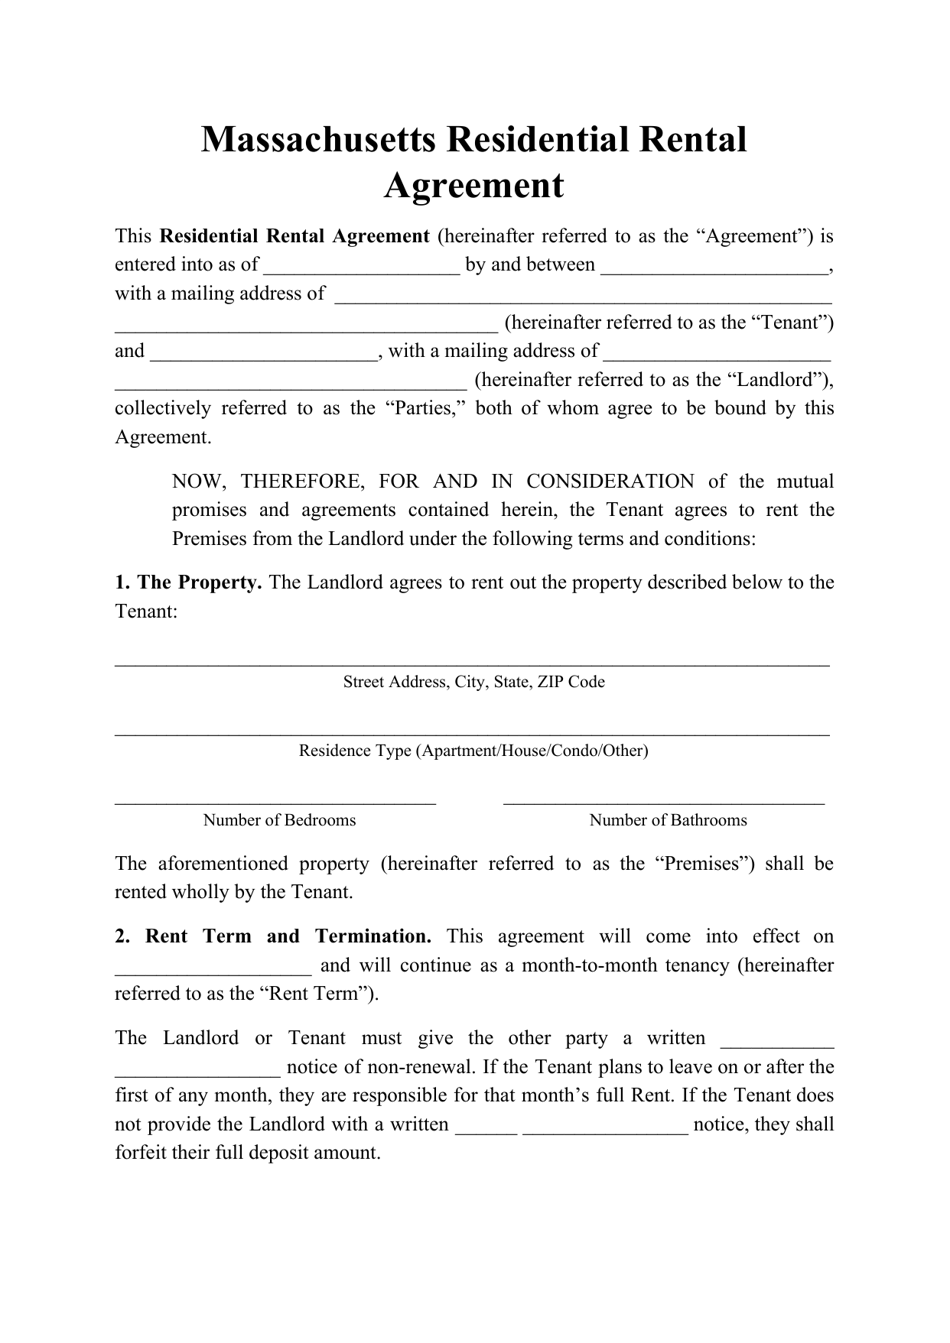 massachusetts-residential-rental-agreement-template-fill-out-sign